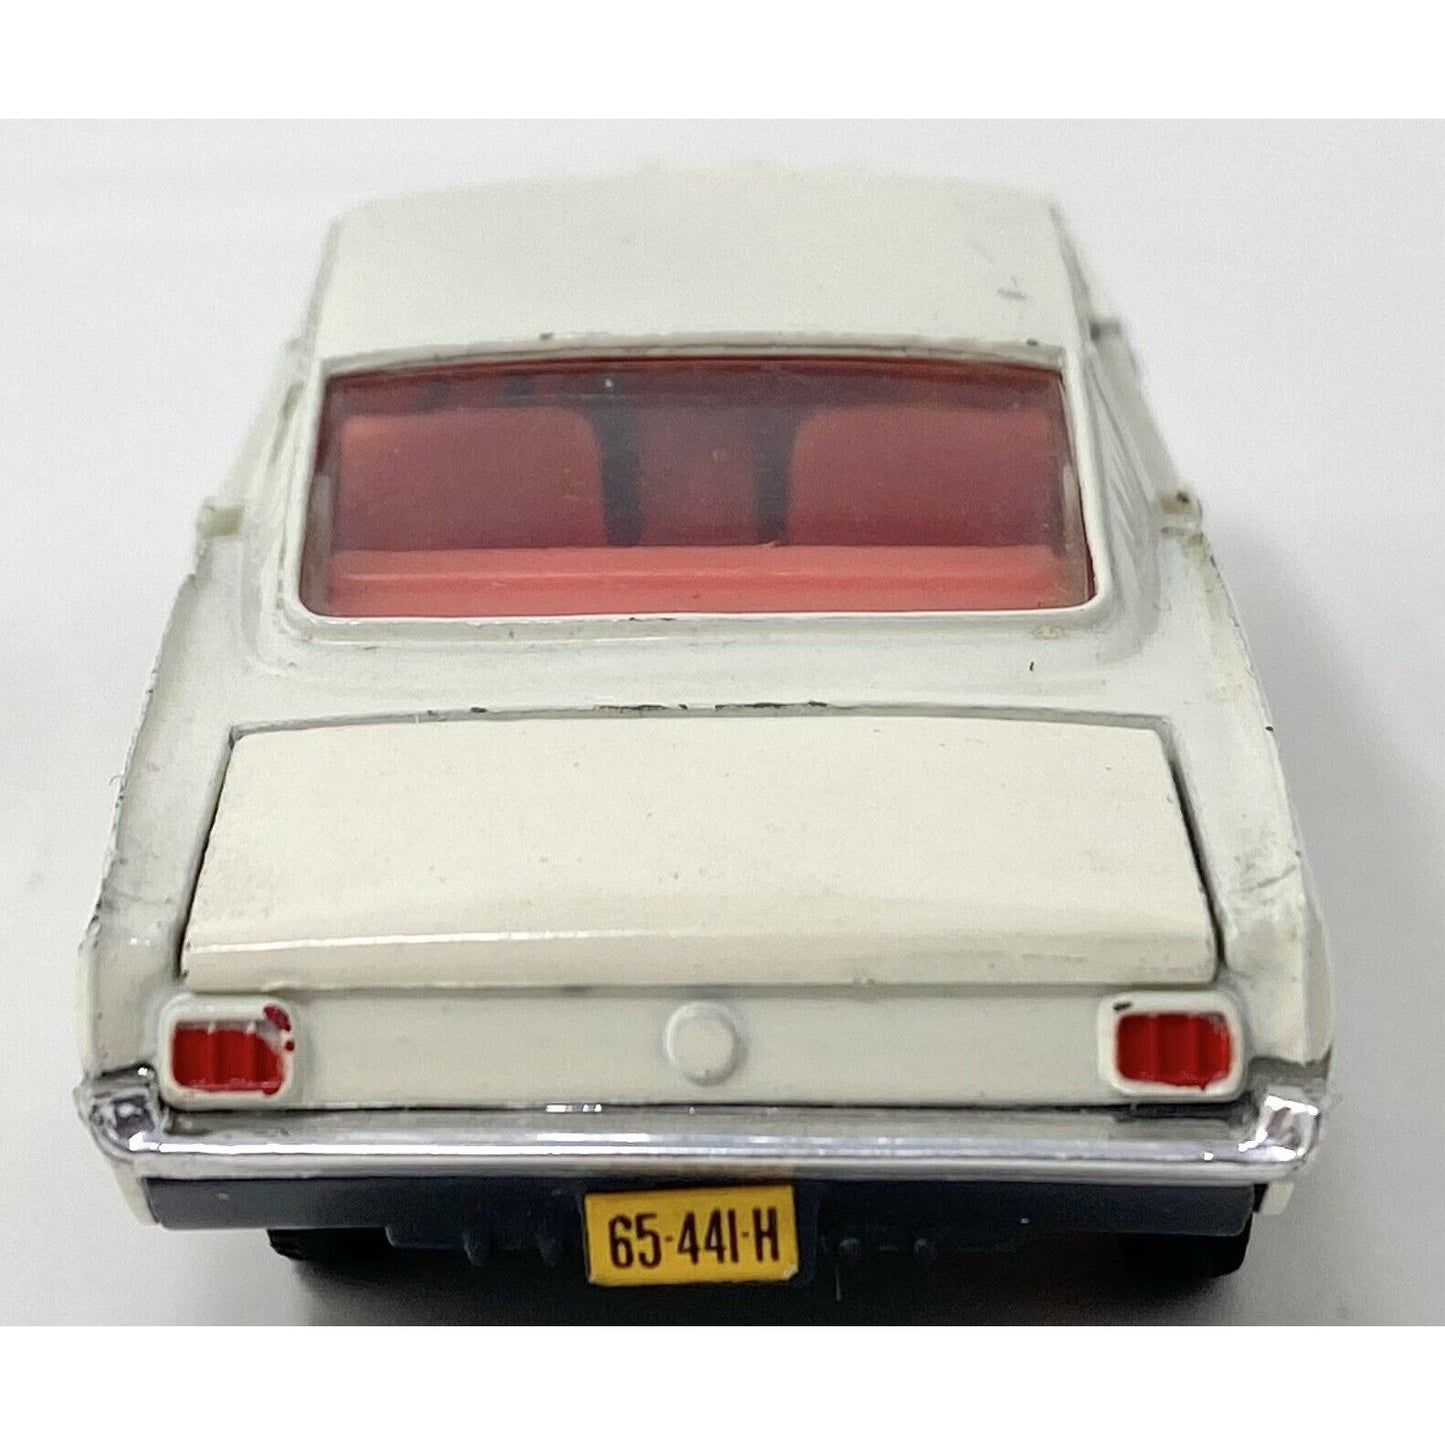 Vintage 1960's Meccano Dinky Ford Mustang 161 Fastback - England, White